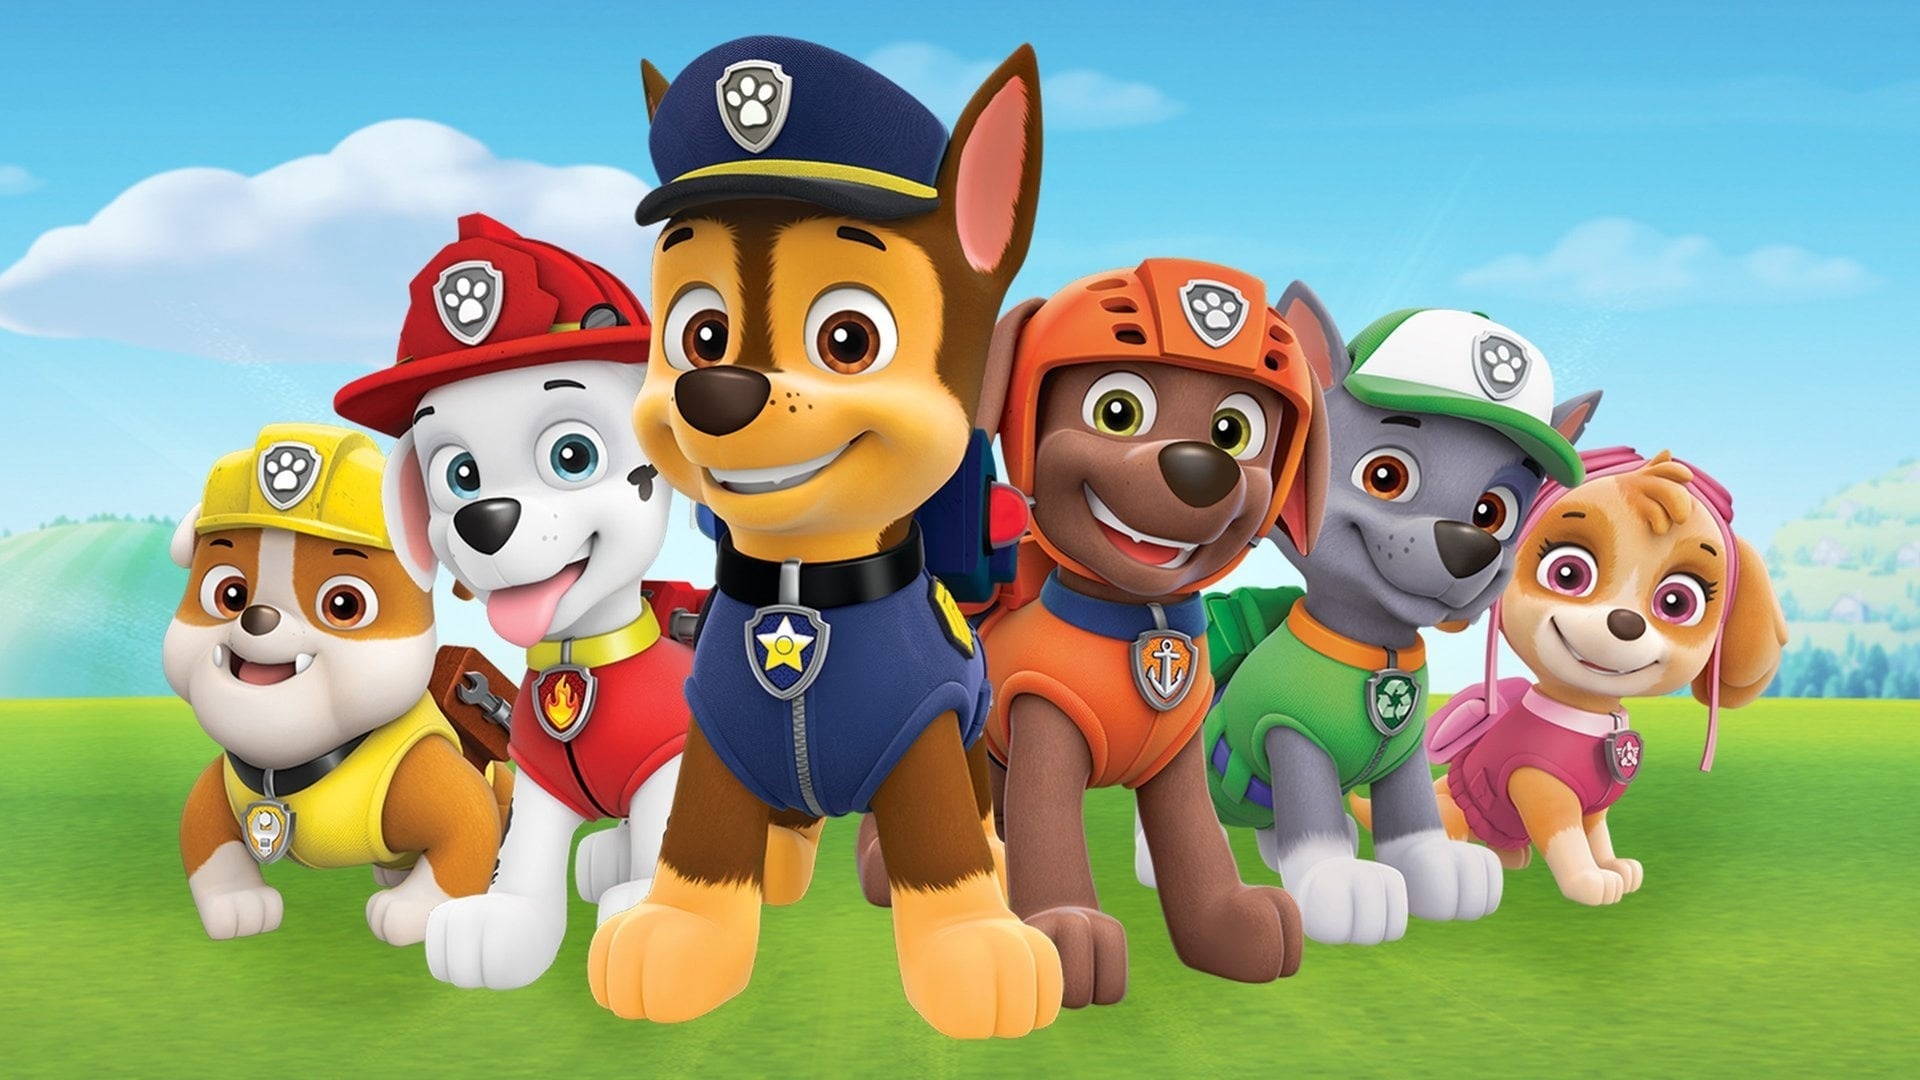 Paw Patrol TV series, Animated adventure, Canine squad, Rescue missions, 1920x1080 Full HD Desktop